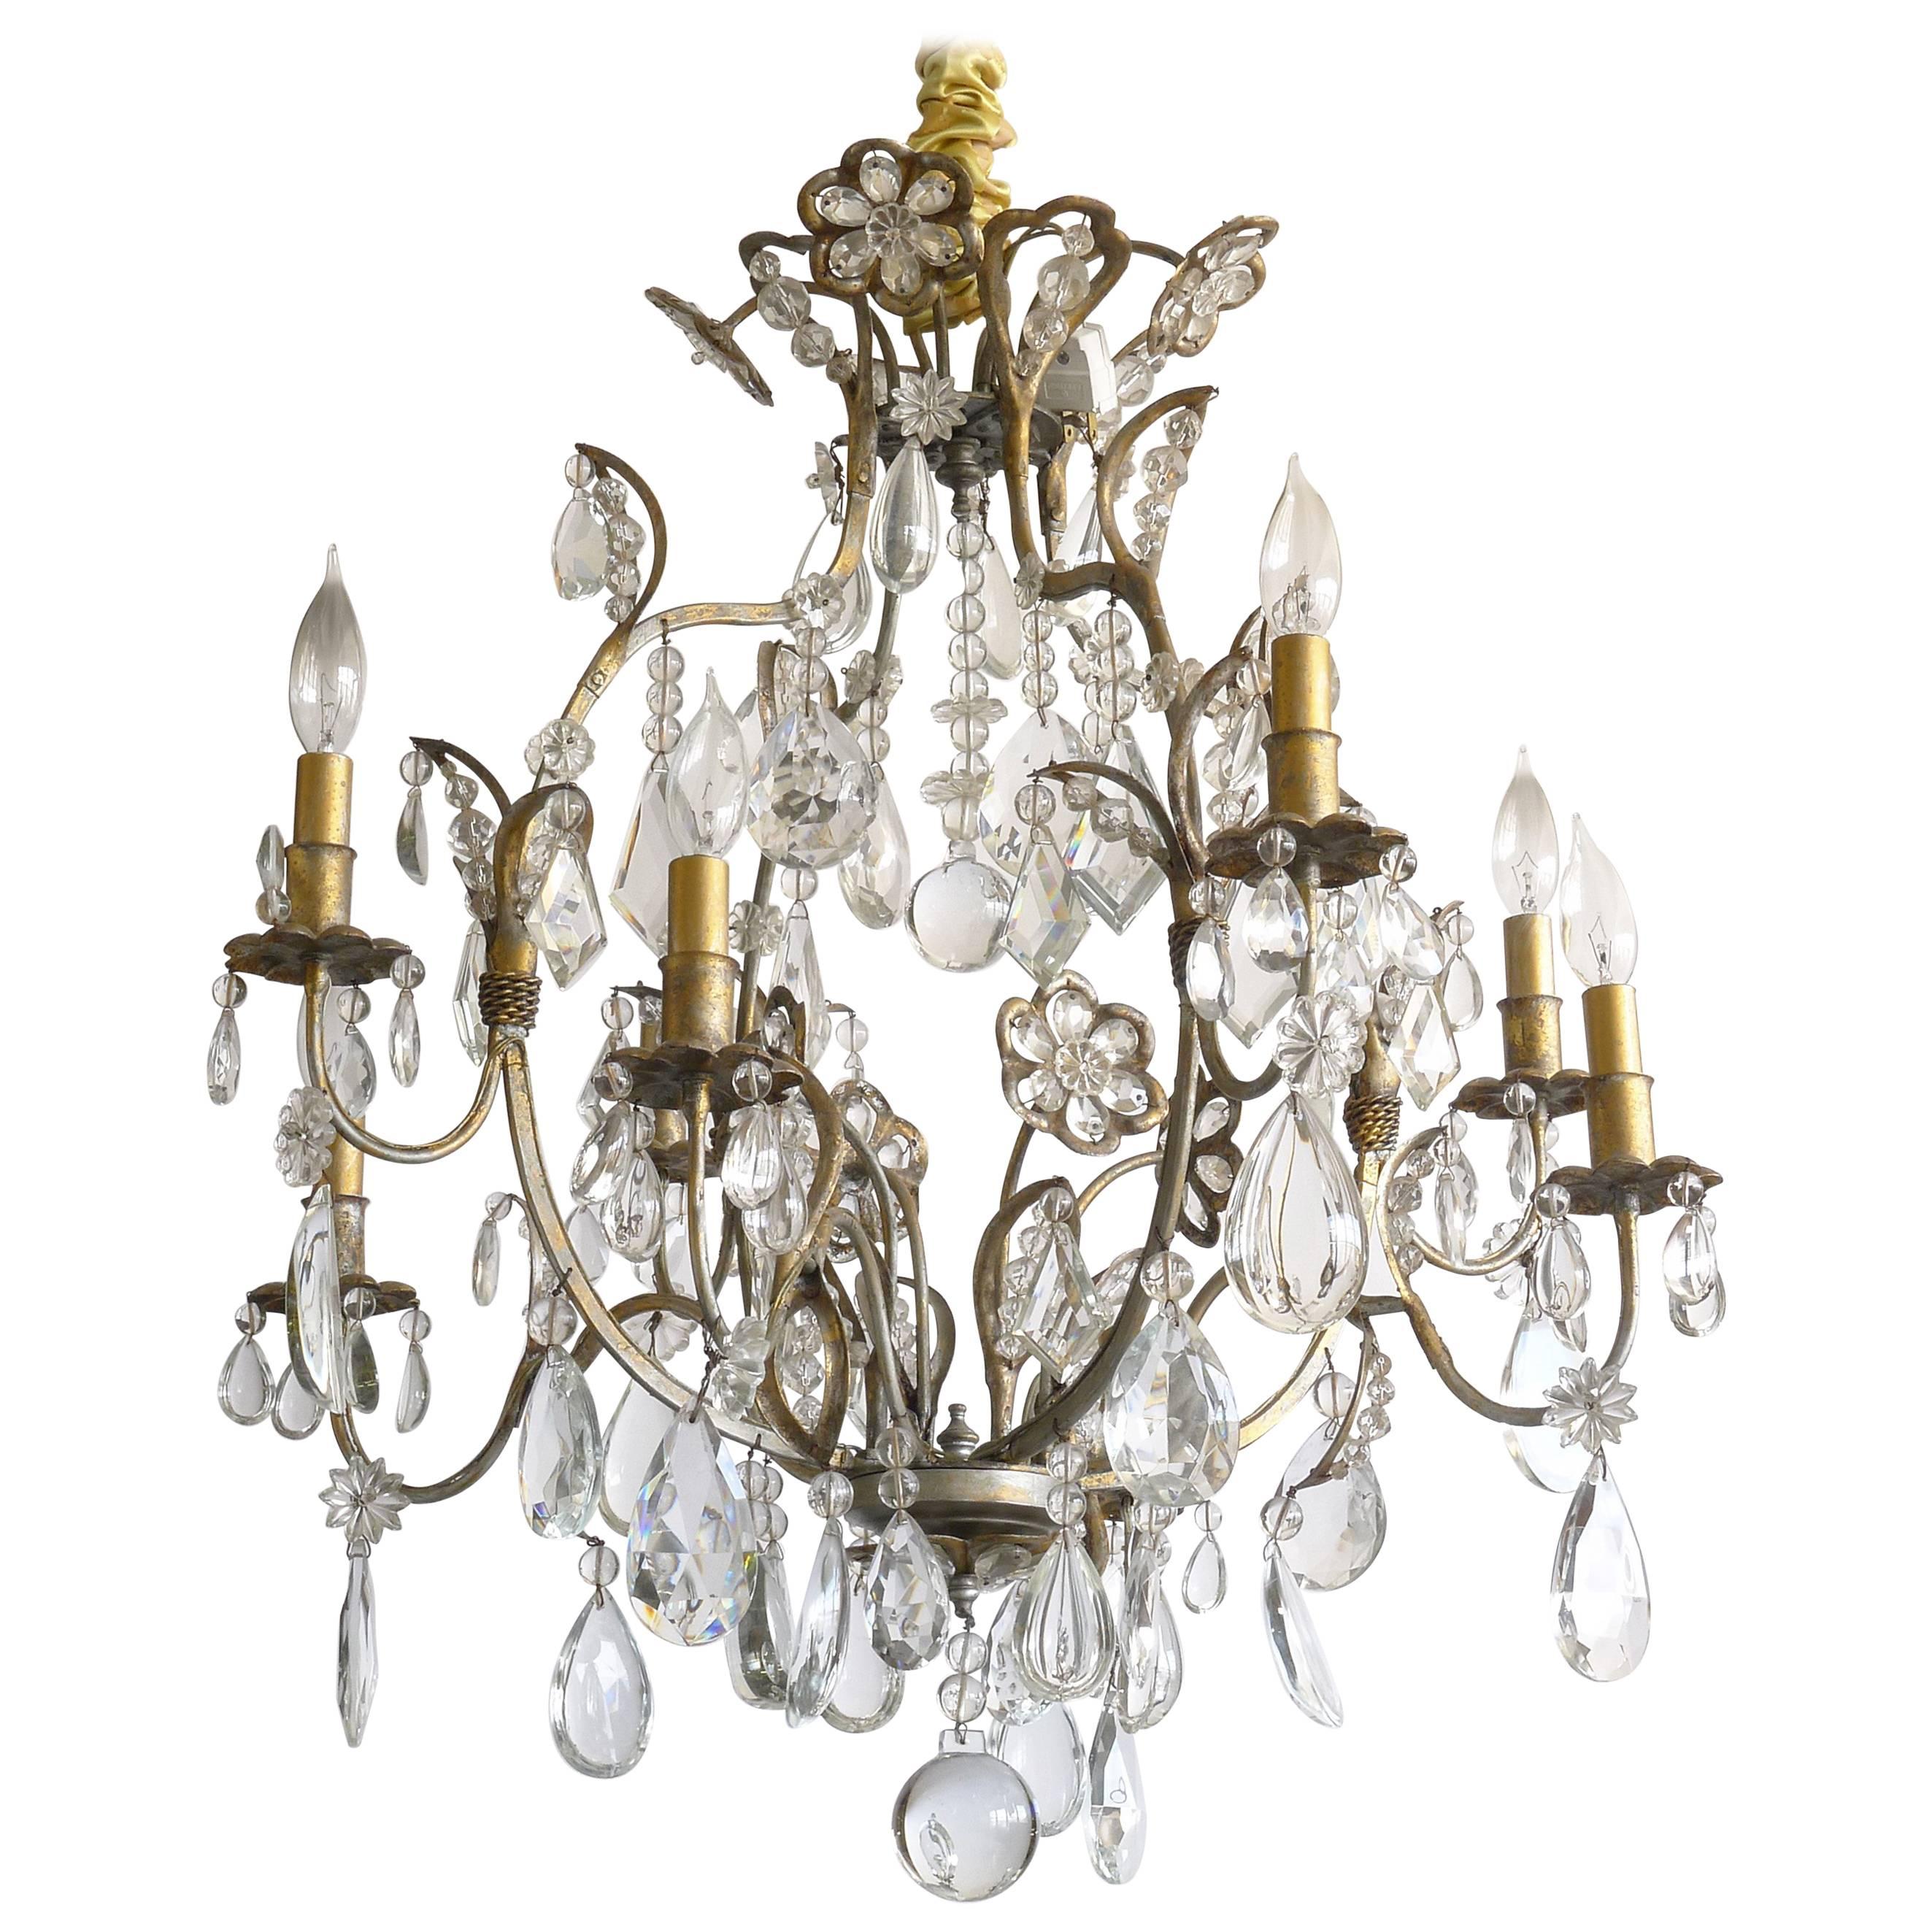 Hollywood Regency Gilt Decorated Wrought Iron and Crystal Eight-Arm Chandelier For Sale